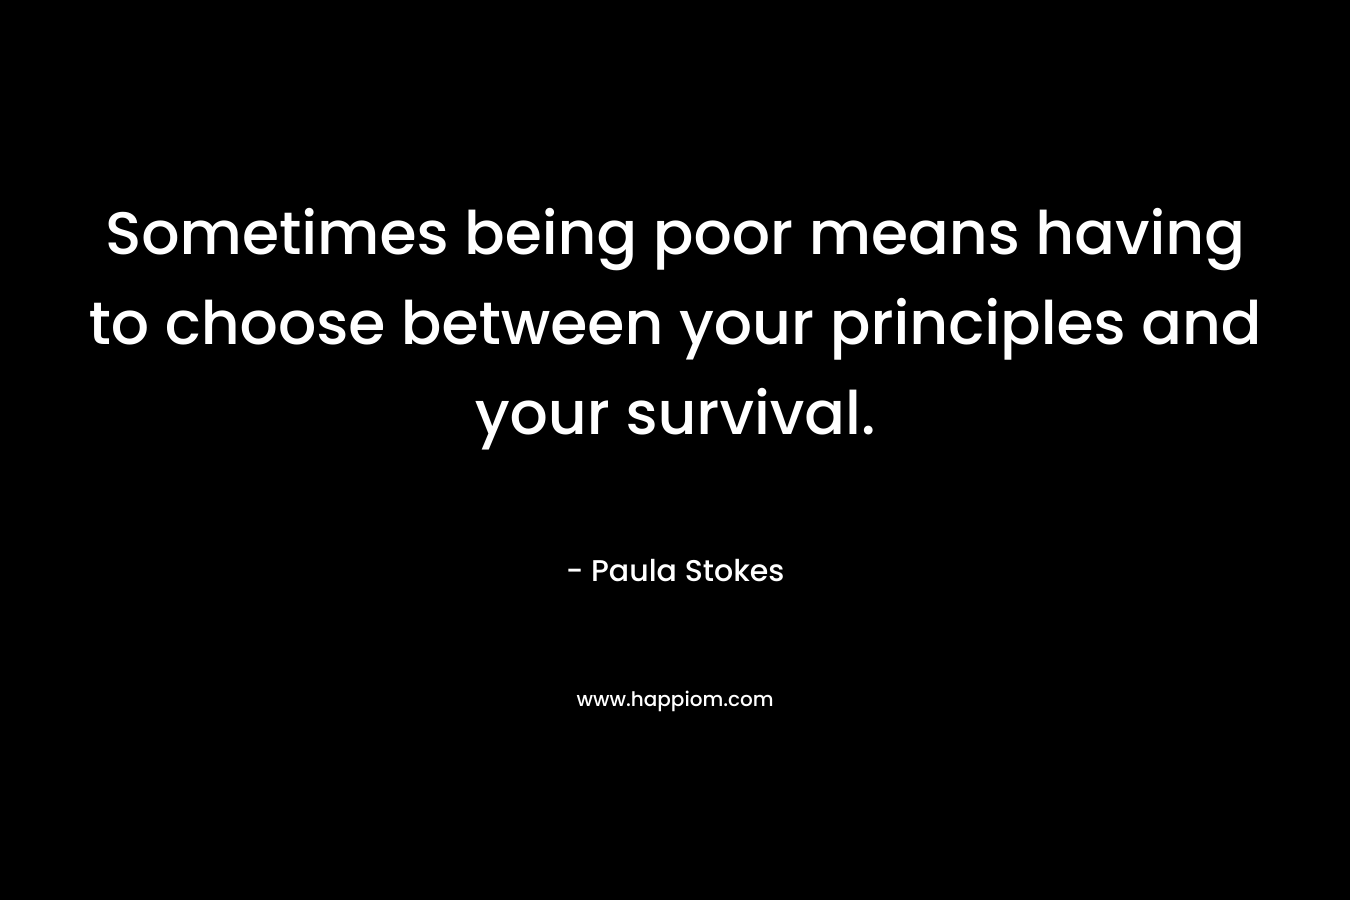 Sometimes being poor means having to choose between your principles and your survival. – Paula Stokes